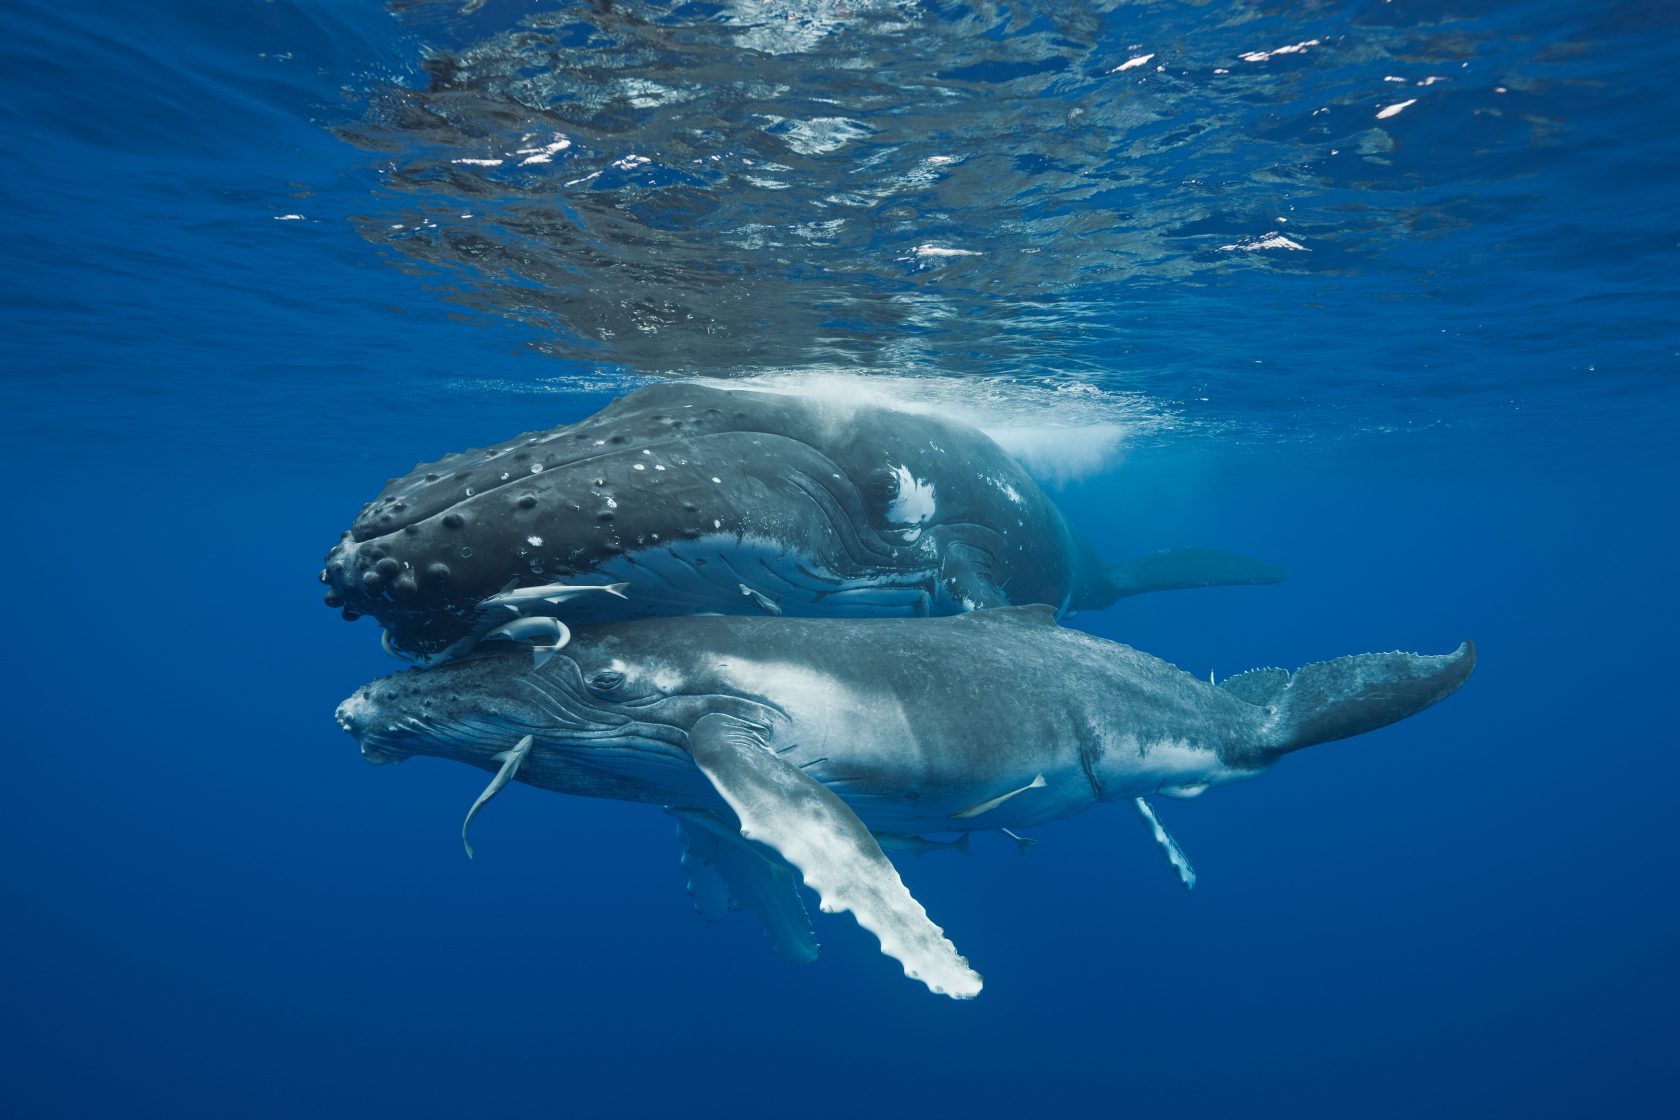 Horizontal image hires stock file, Humpback Whales from Tonga, great shot for advertising and editorial use